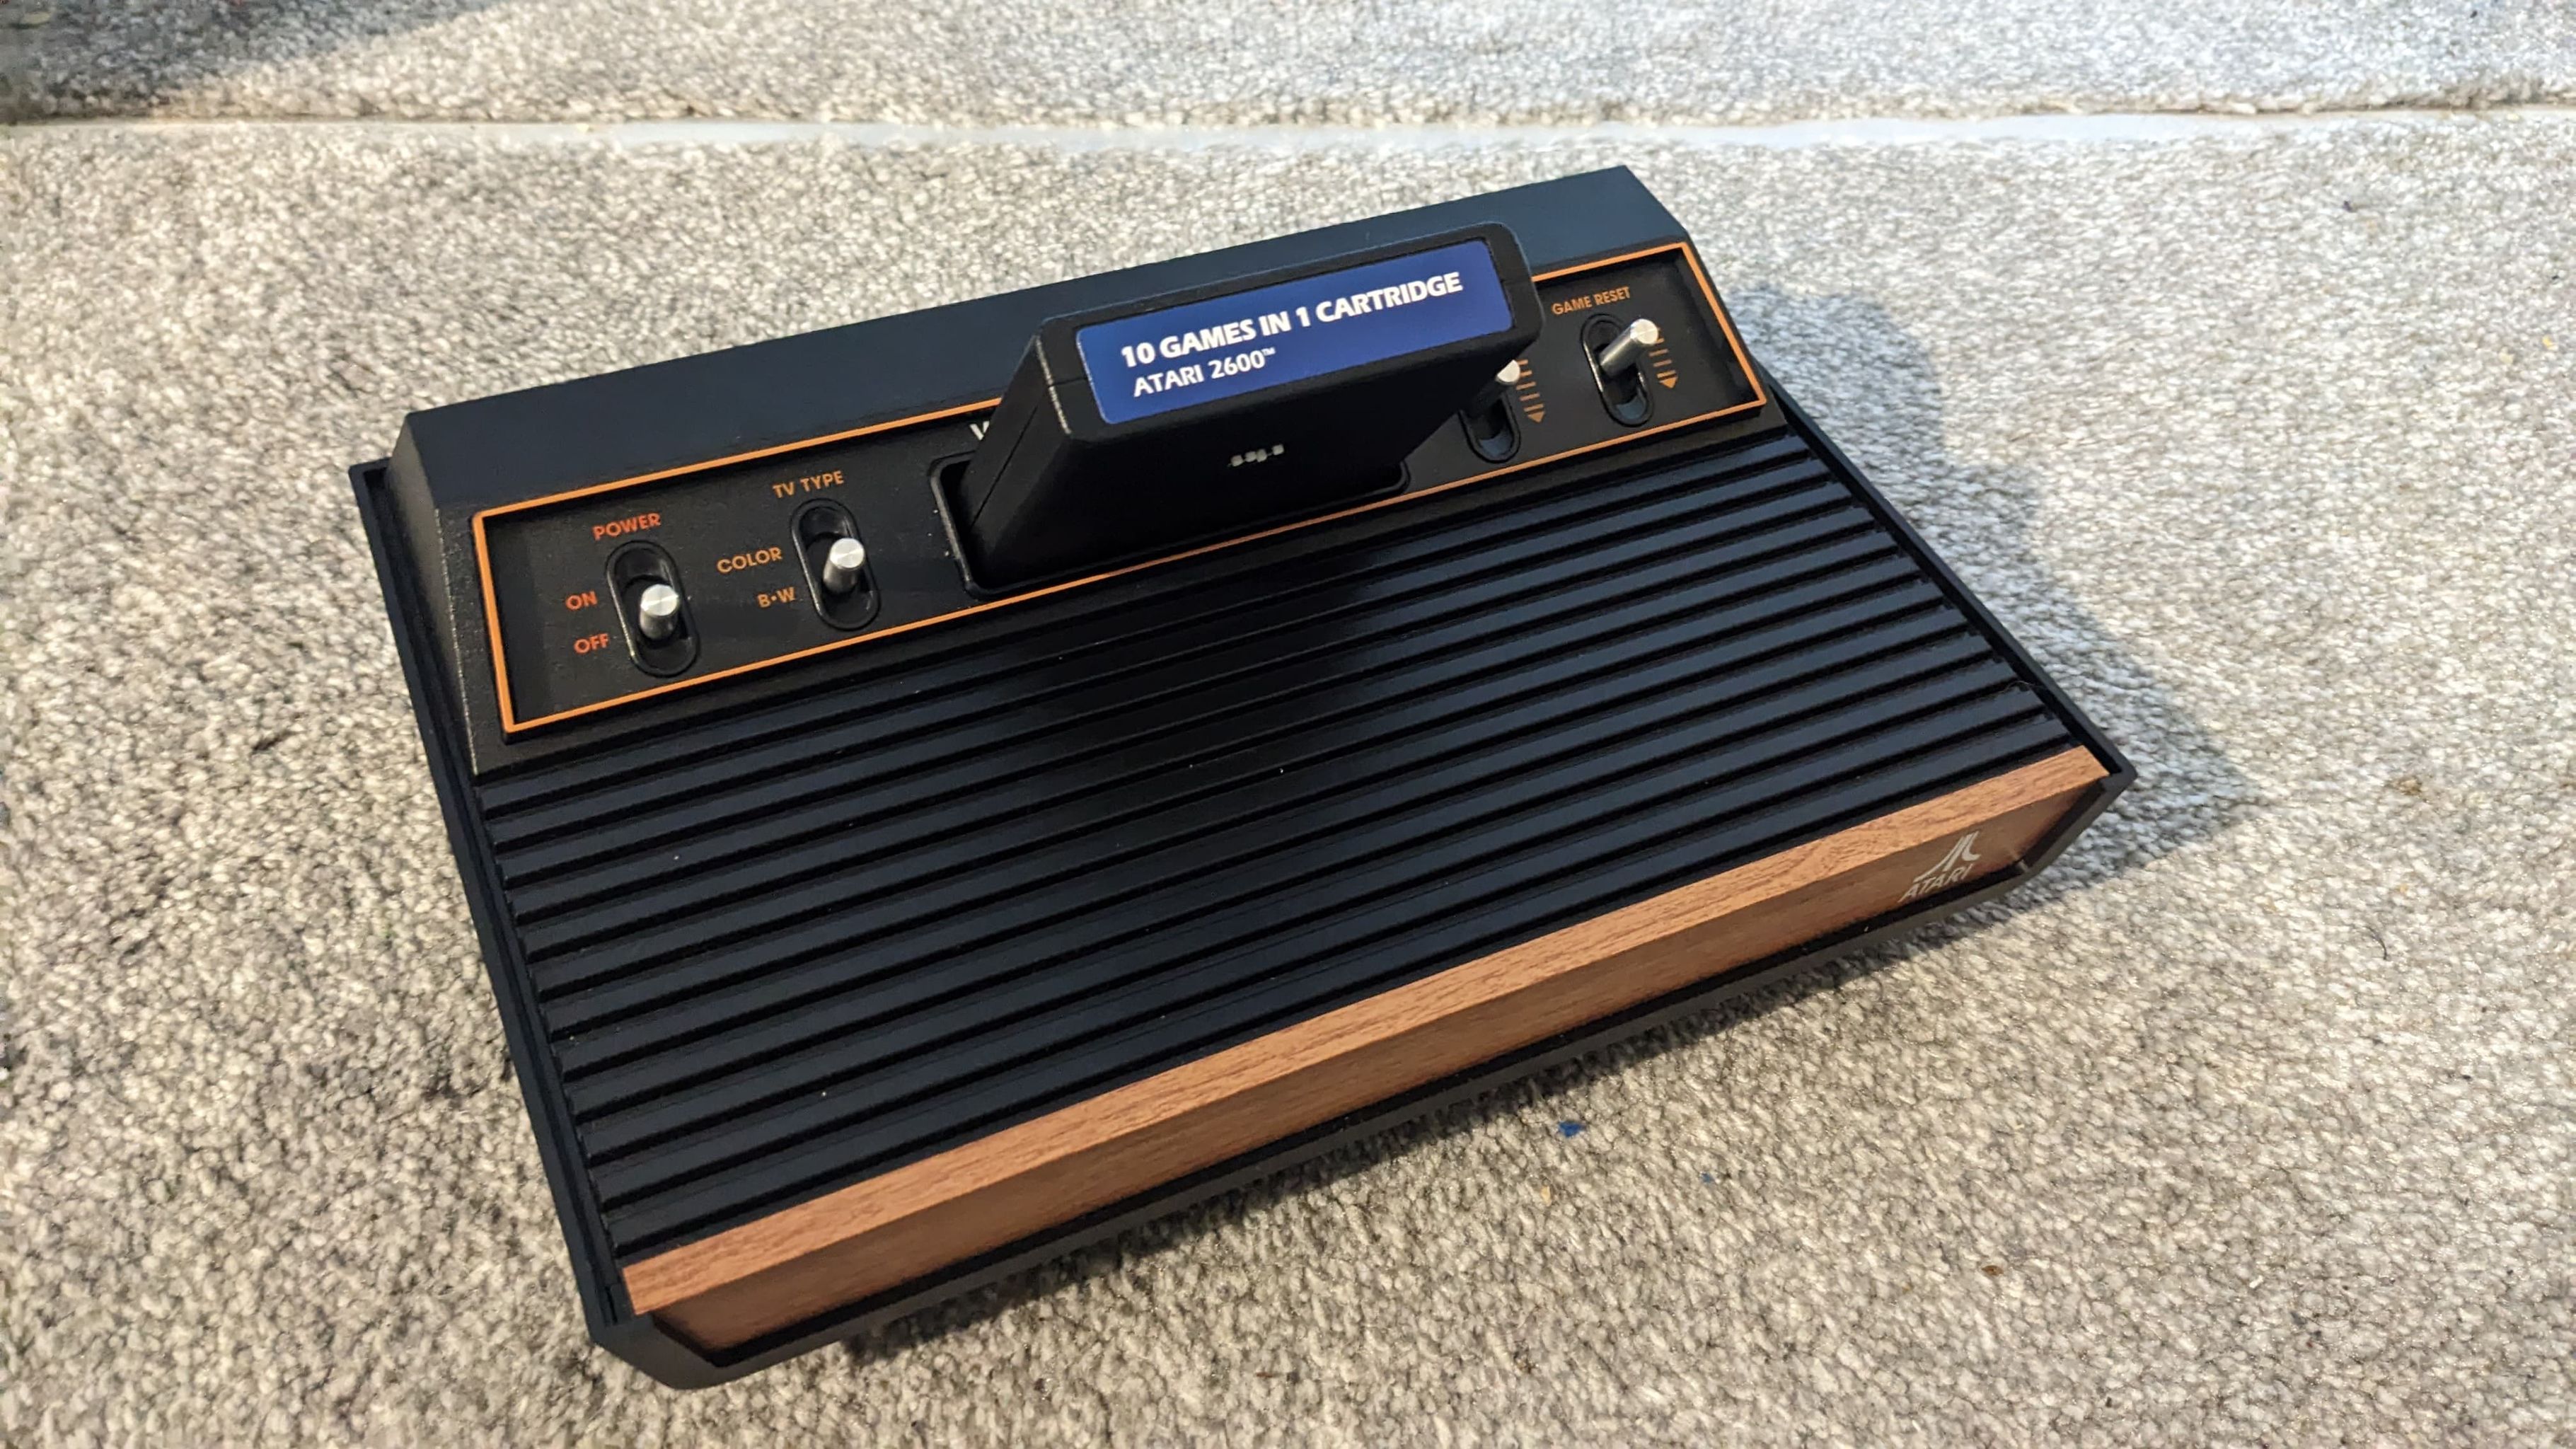 Atari 2600 is making a comeback with a Plus